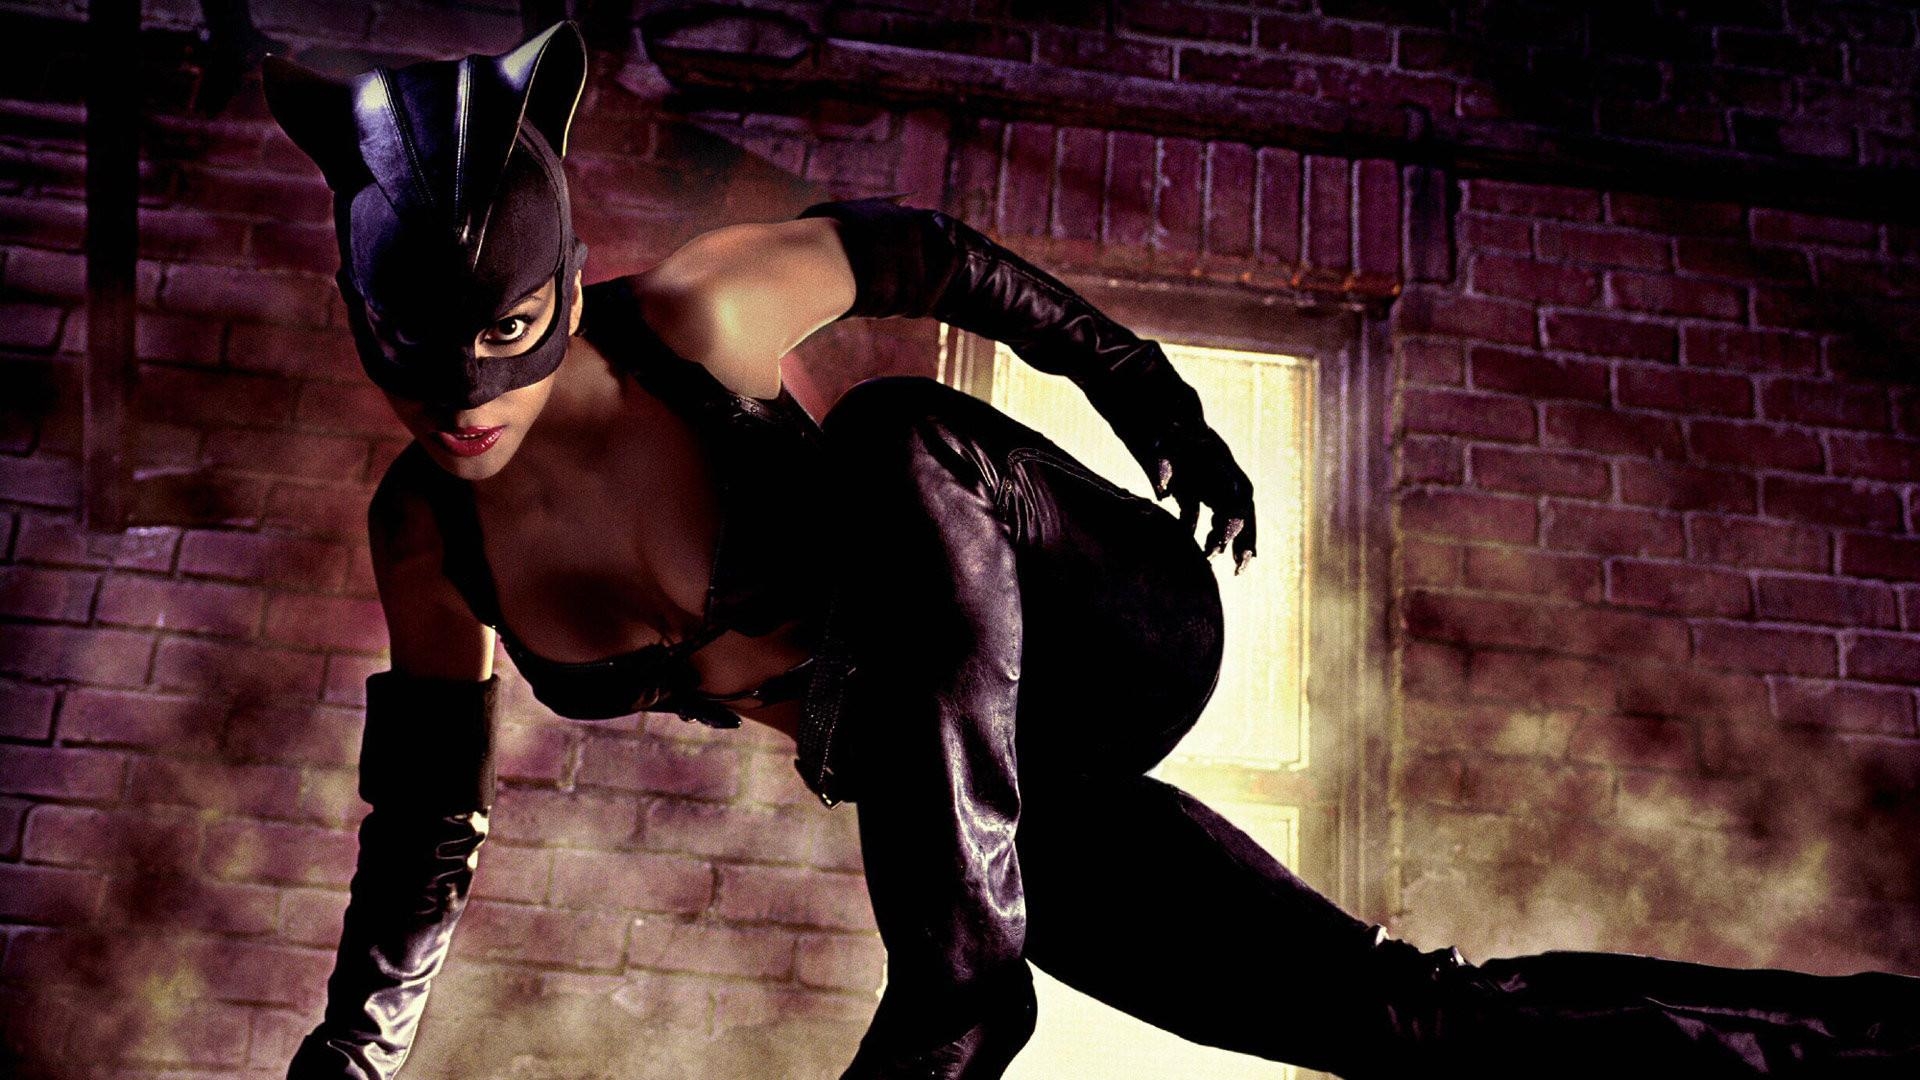 Halle Berry Workout Routine and Diet: Catwoman meets our X-Men Mutant Storm1920 x 1080